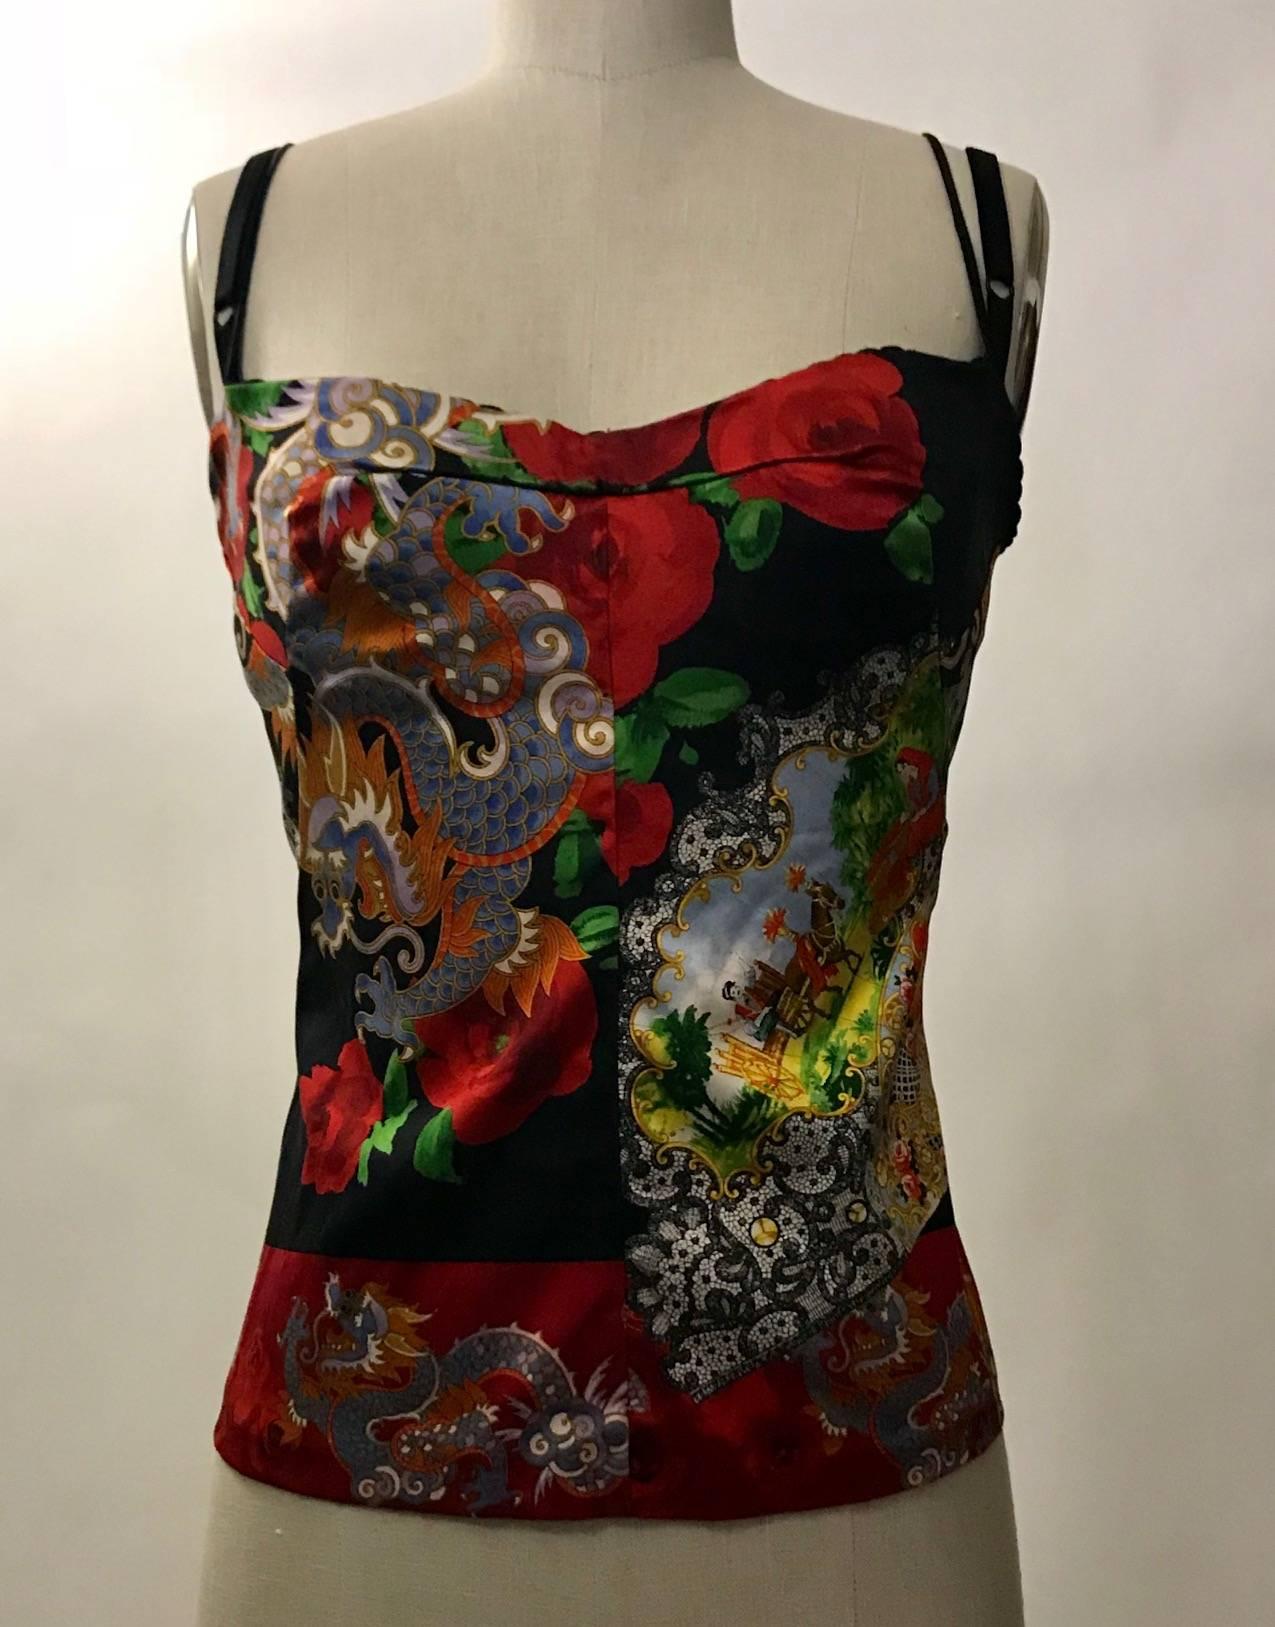 Dolce & Gabbana red top featuring dragon and rose print. Built in mesh bralette with scalloped edging at top (straps meant to be exposed.) Fastens along back with hook and eye closures.

Silk/stretch blend.

Made in Italy.

Size IT 44,